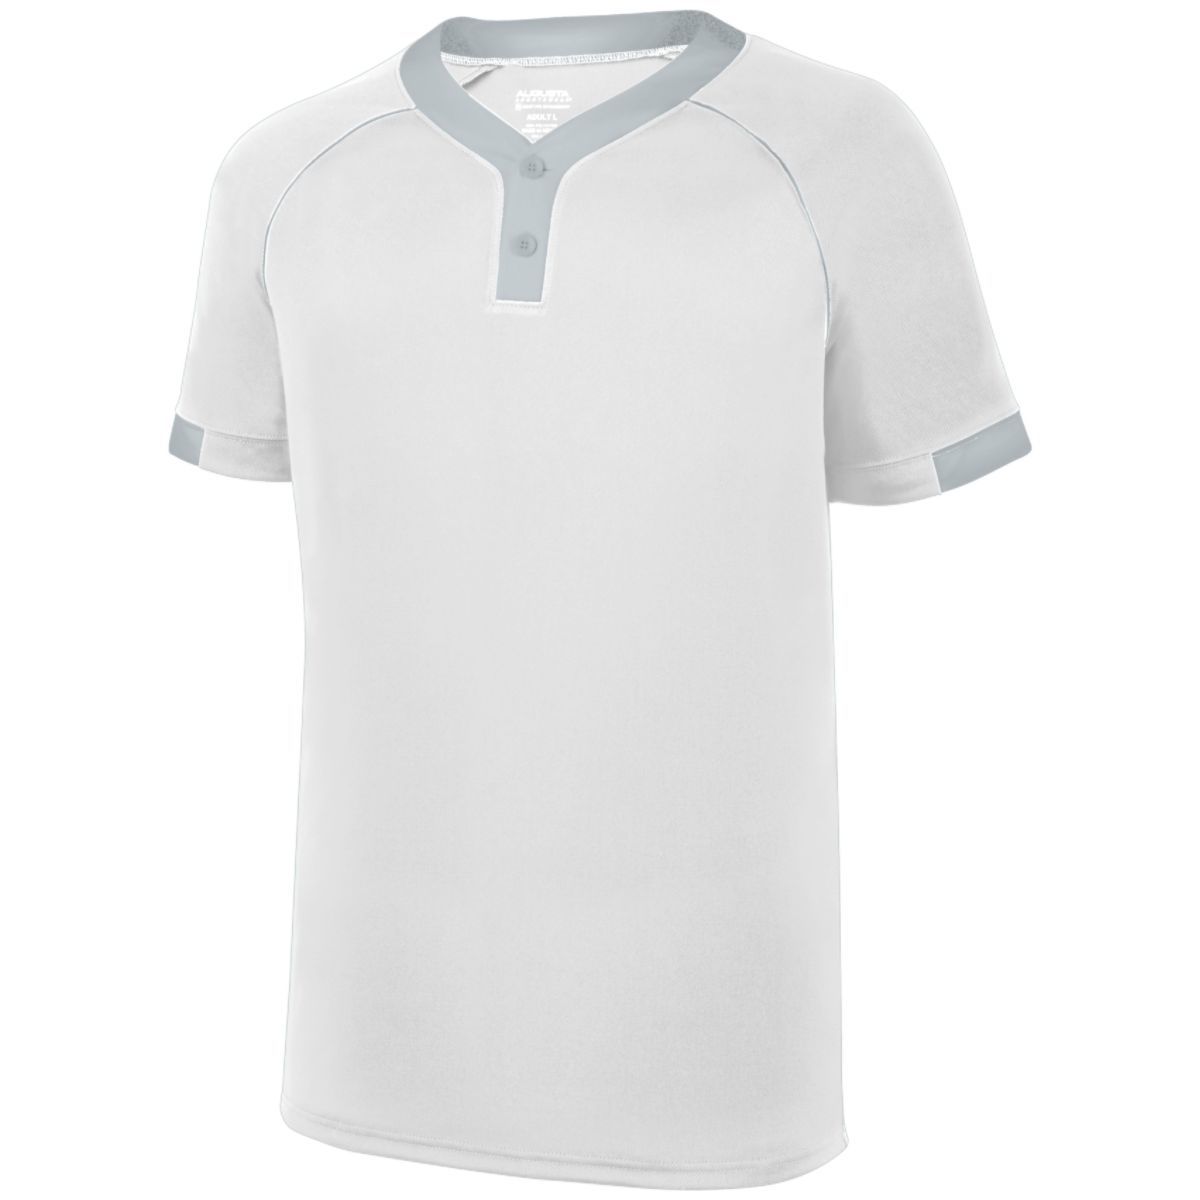 Augusta Sportswear Stanza Jersey in White/Silver  -Part of the Adult, Adult-Jersey, Augusta-Products, Baseball, Shirts, All-Sports, All-Sports-1 product lines at KanaleyCreations.com